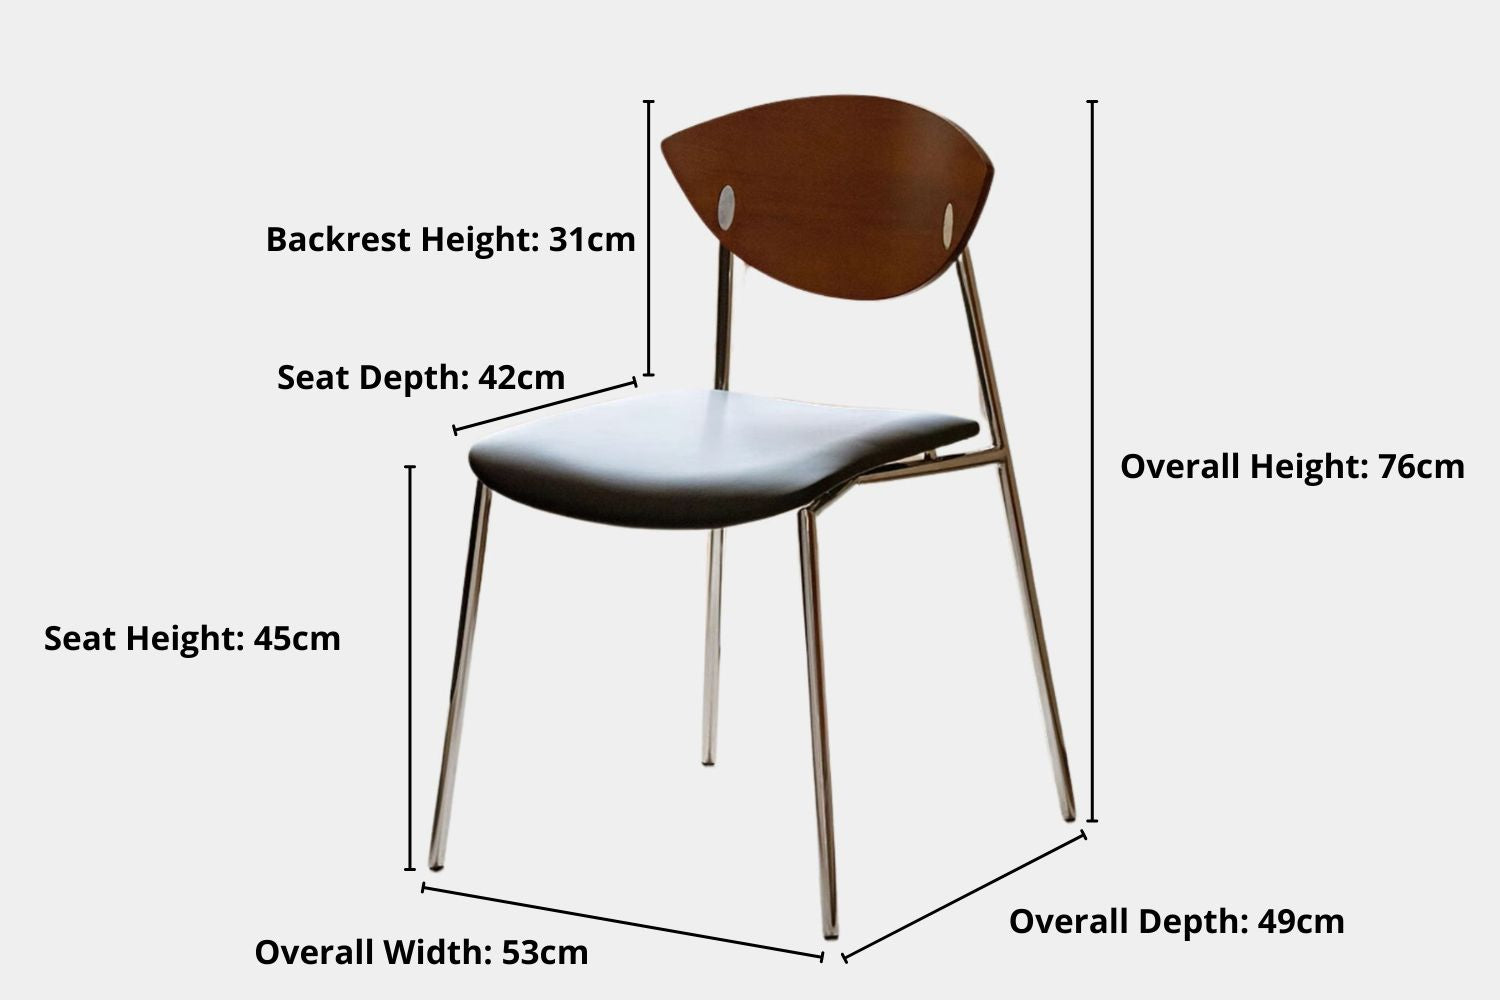 Key product dimensions such as depth, width and height for Tyra Stainless Steel Chair